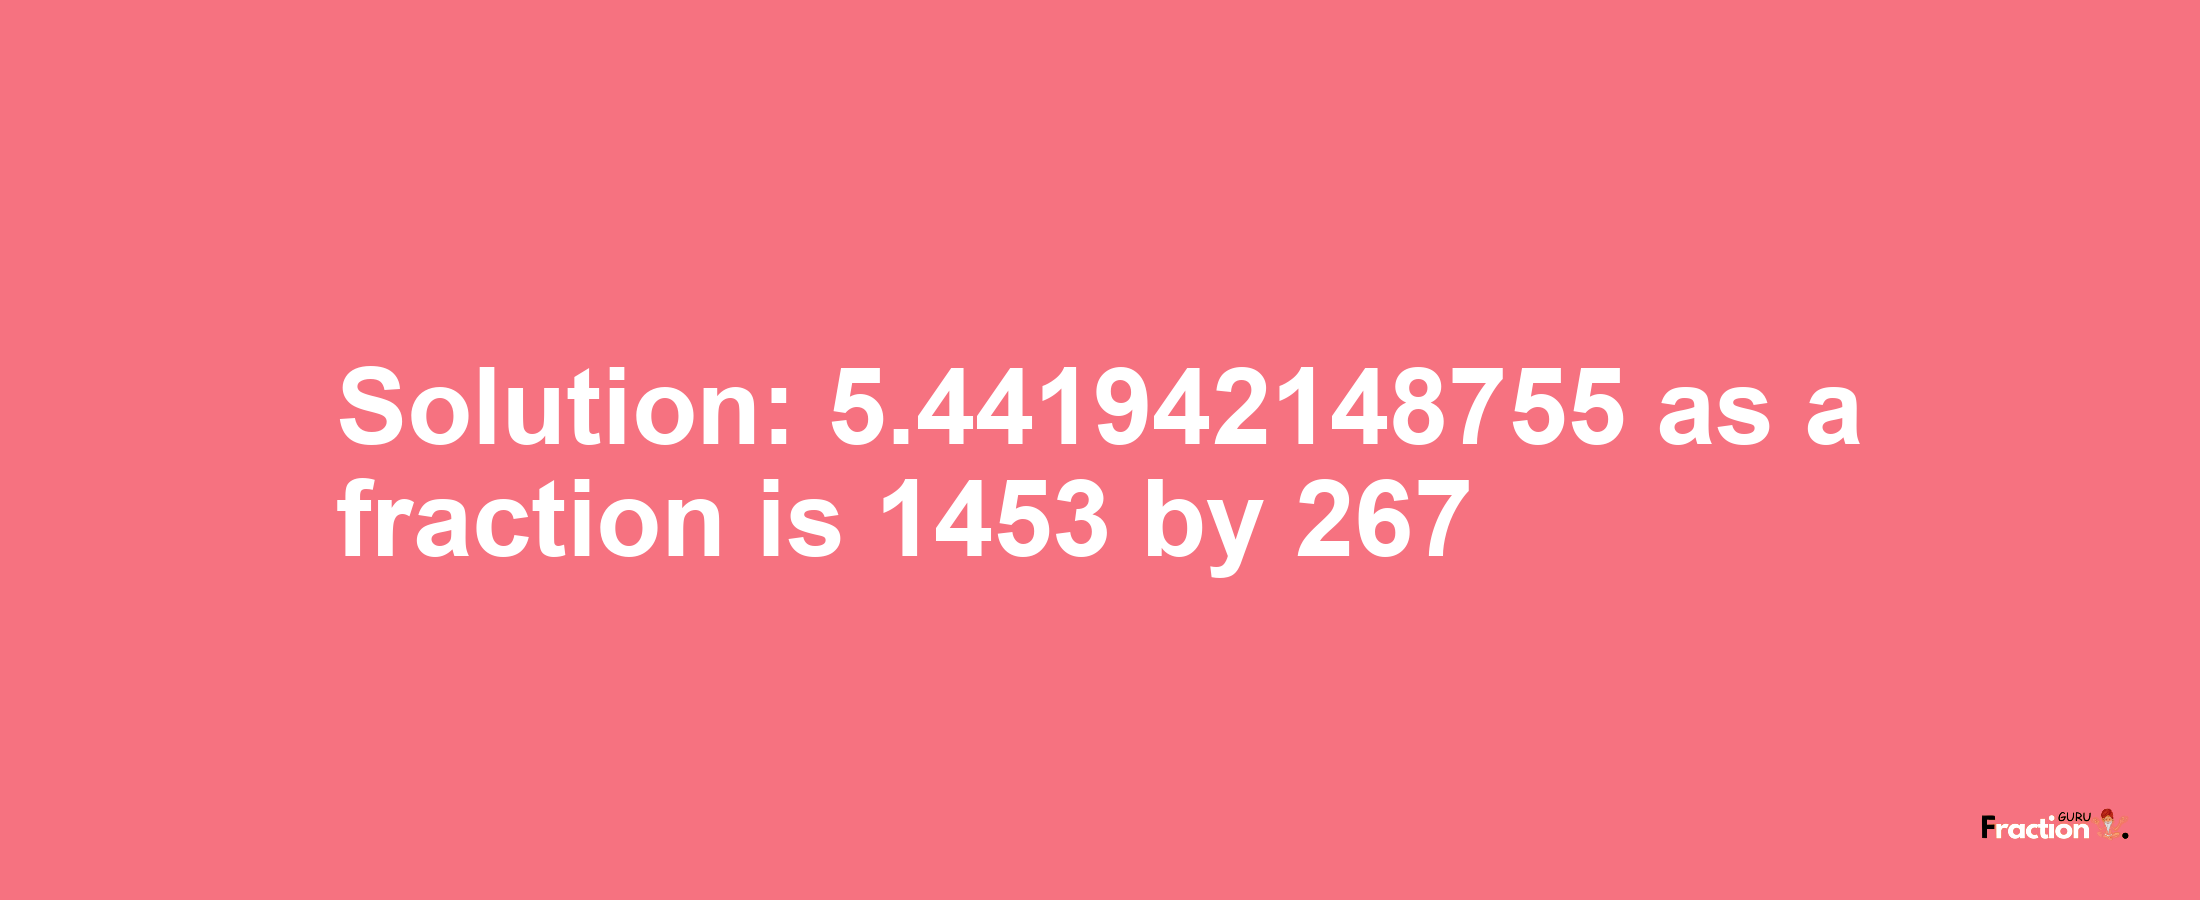 Solution:5.441942148755 as a fraction is 1453/267